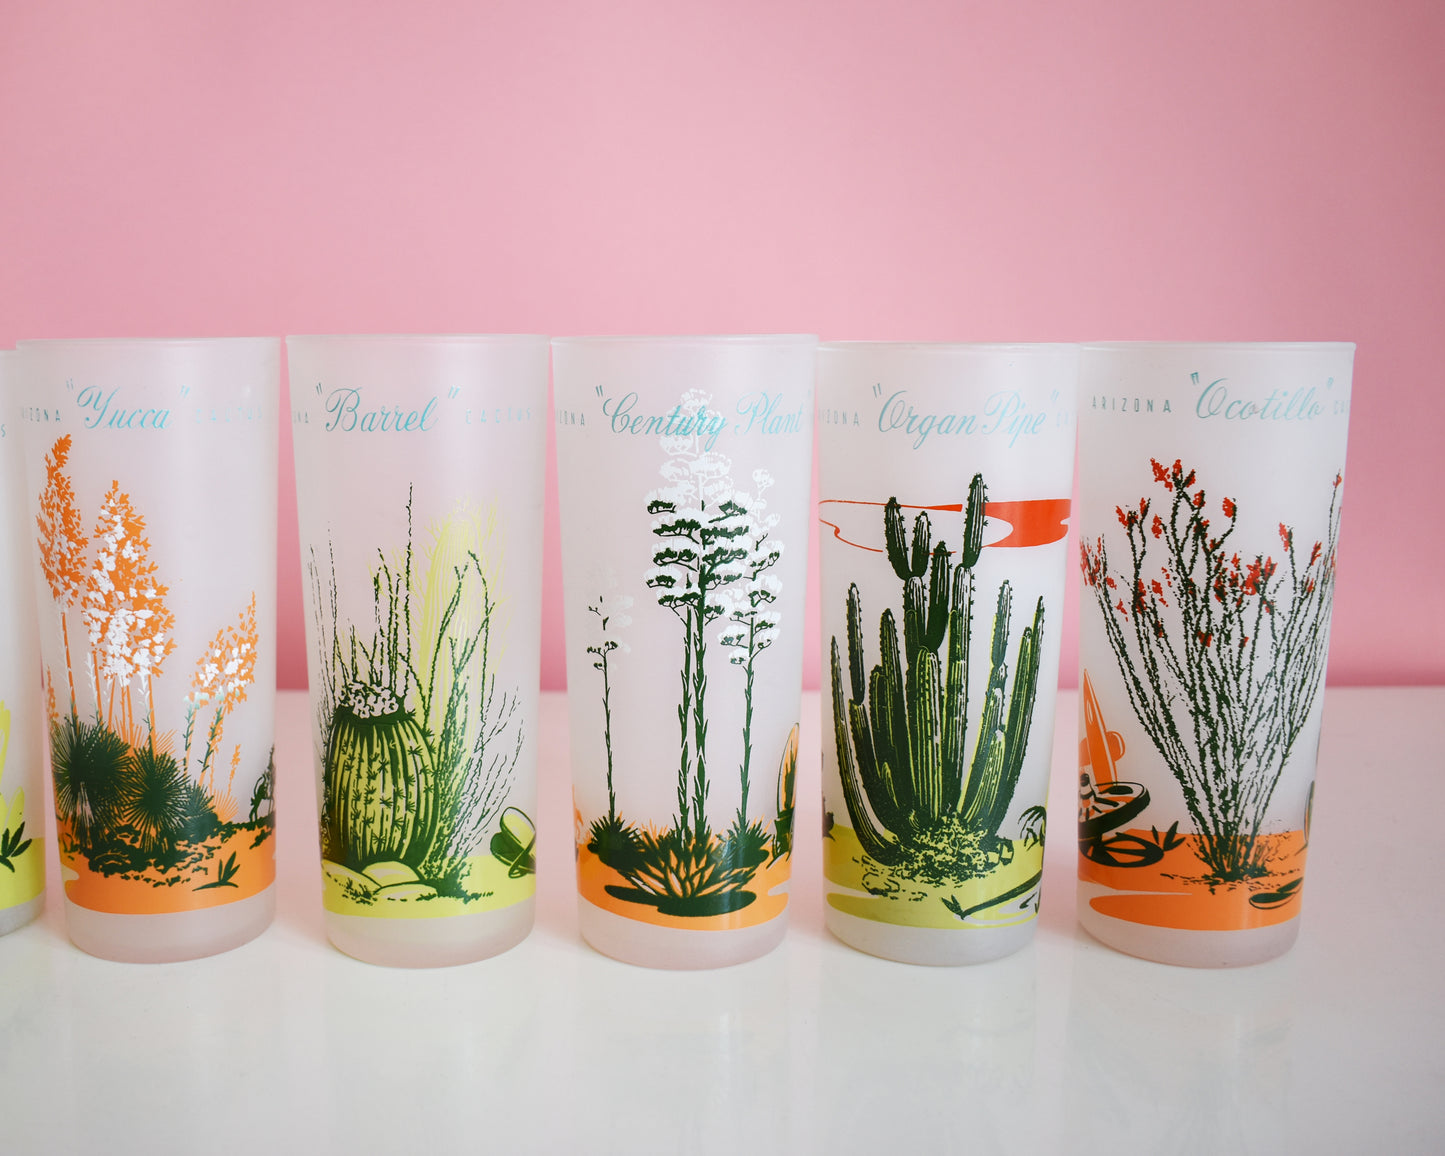 Close up of a set of 8 vintage glasses that each have a cactus or plant that is native to Arizona